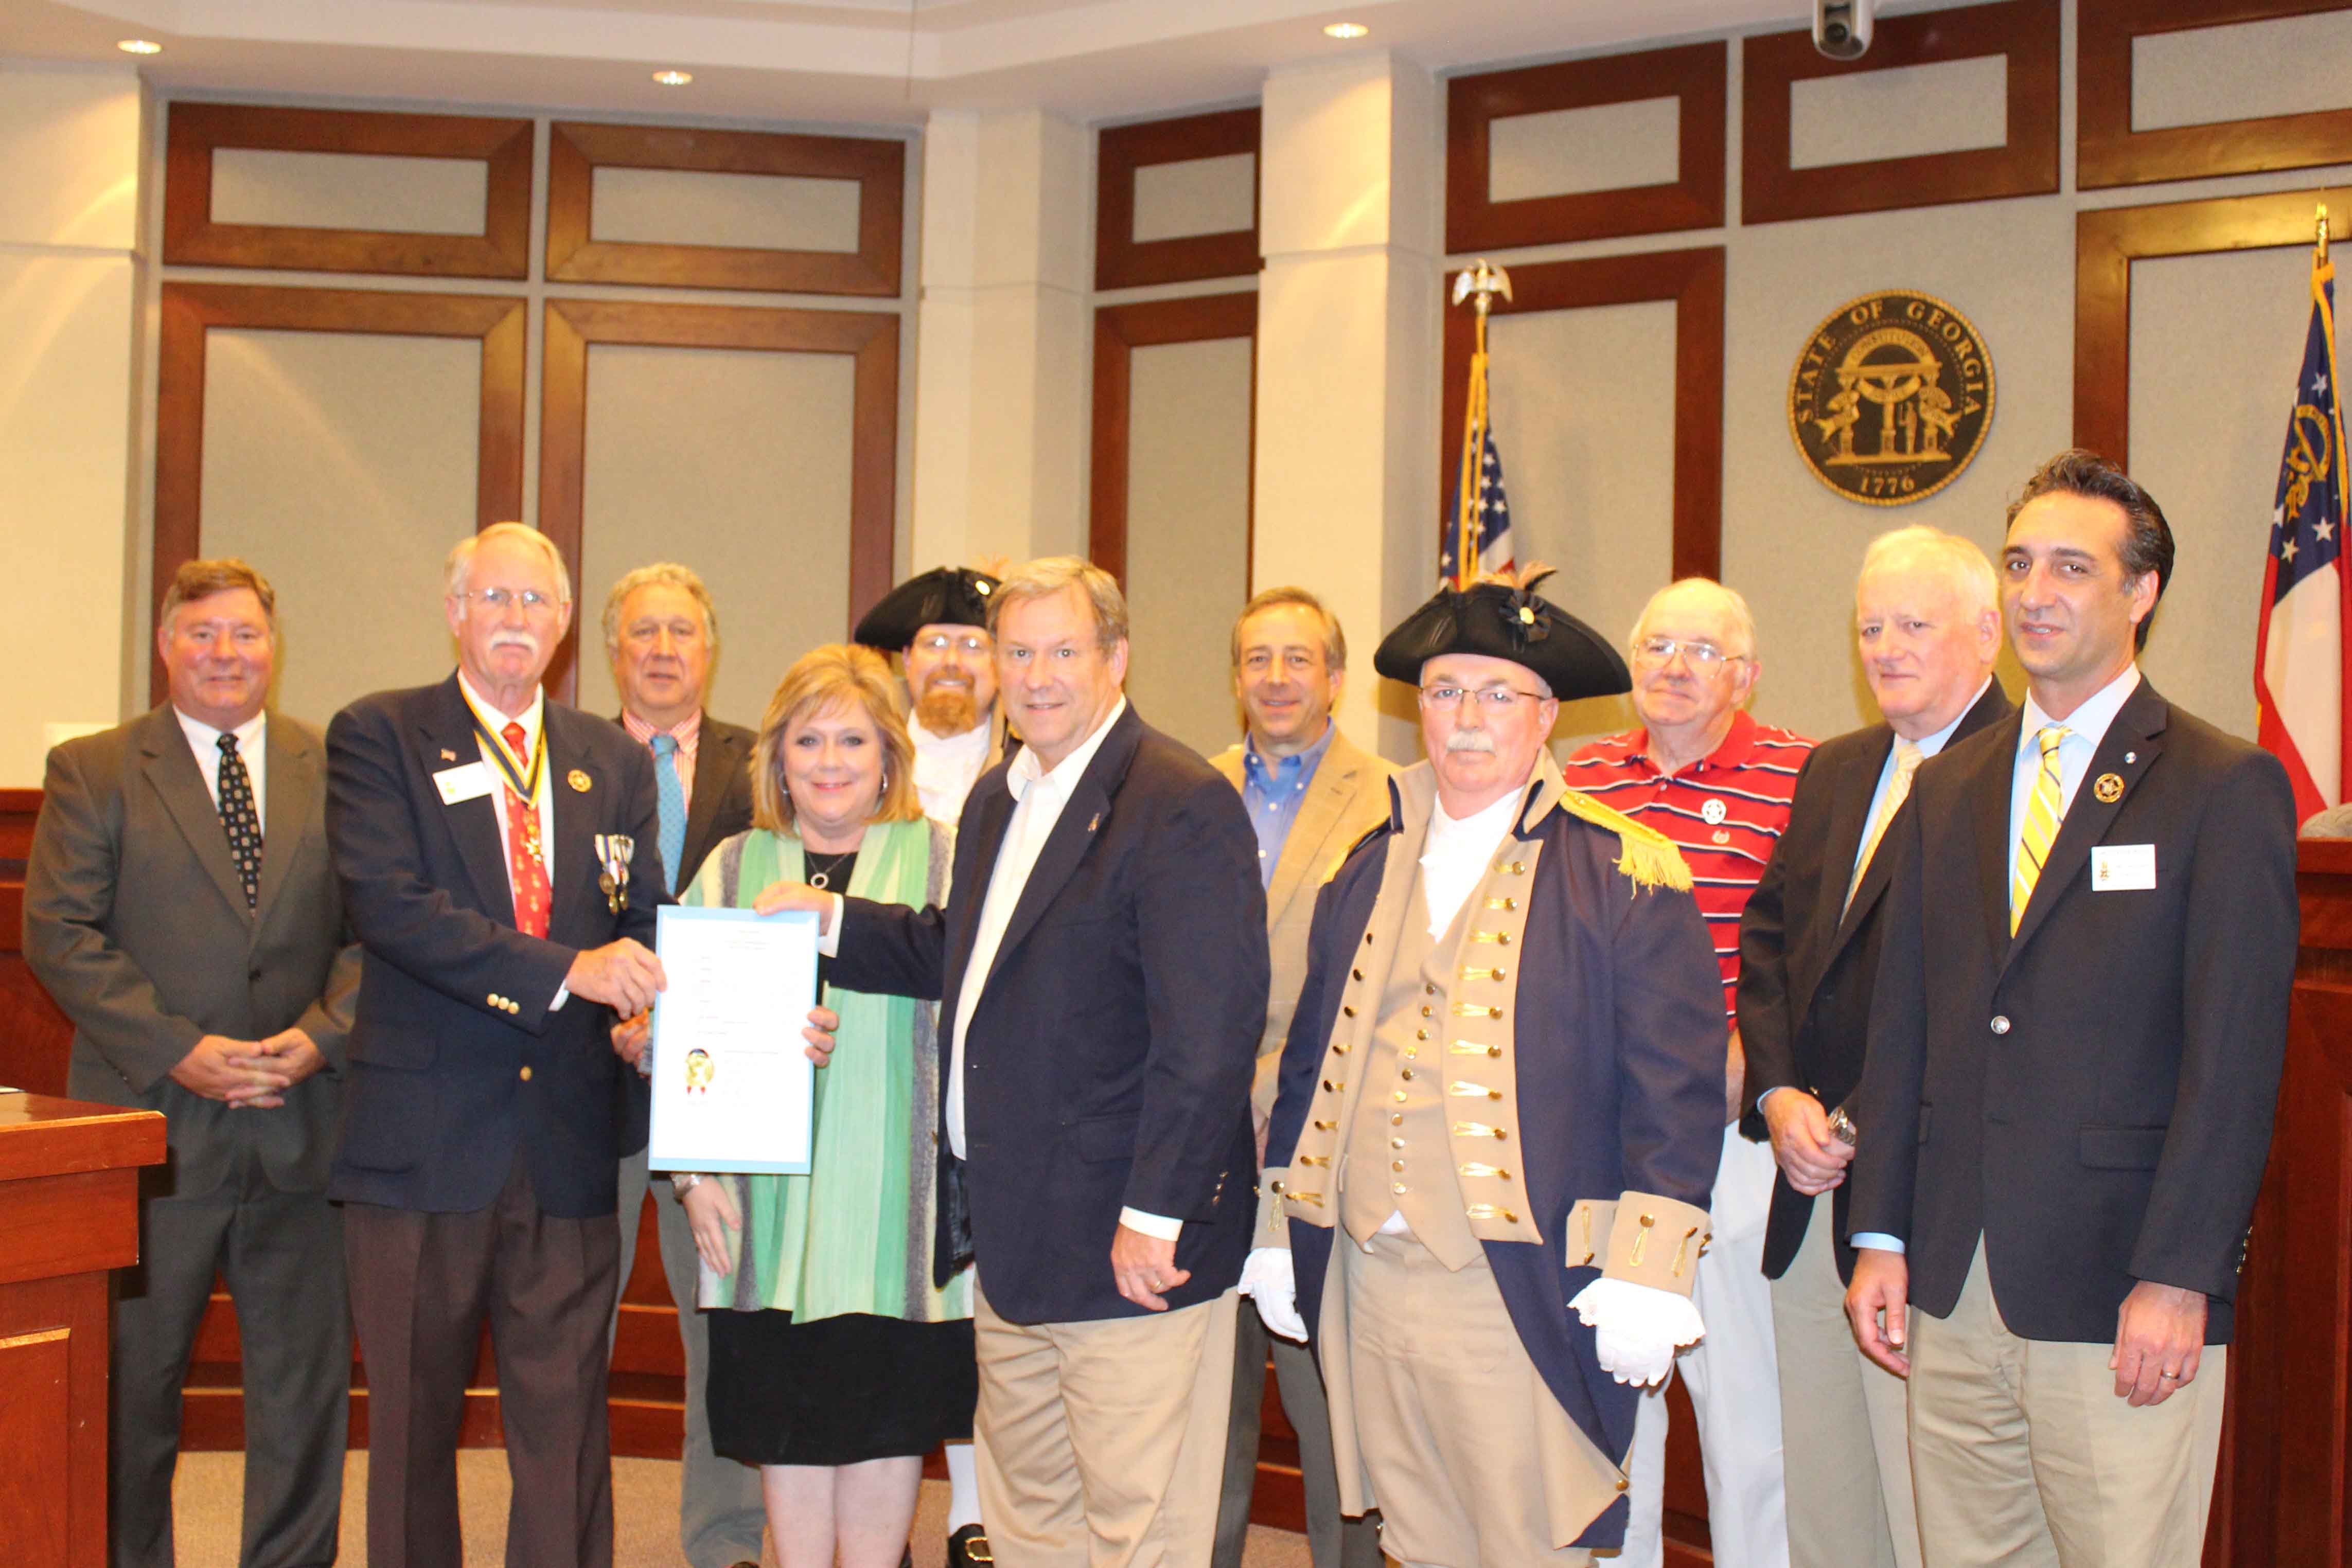 June 14 Recognized as National Flag Day in Forsyth